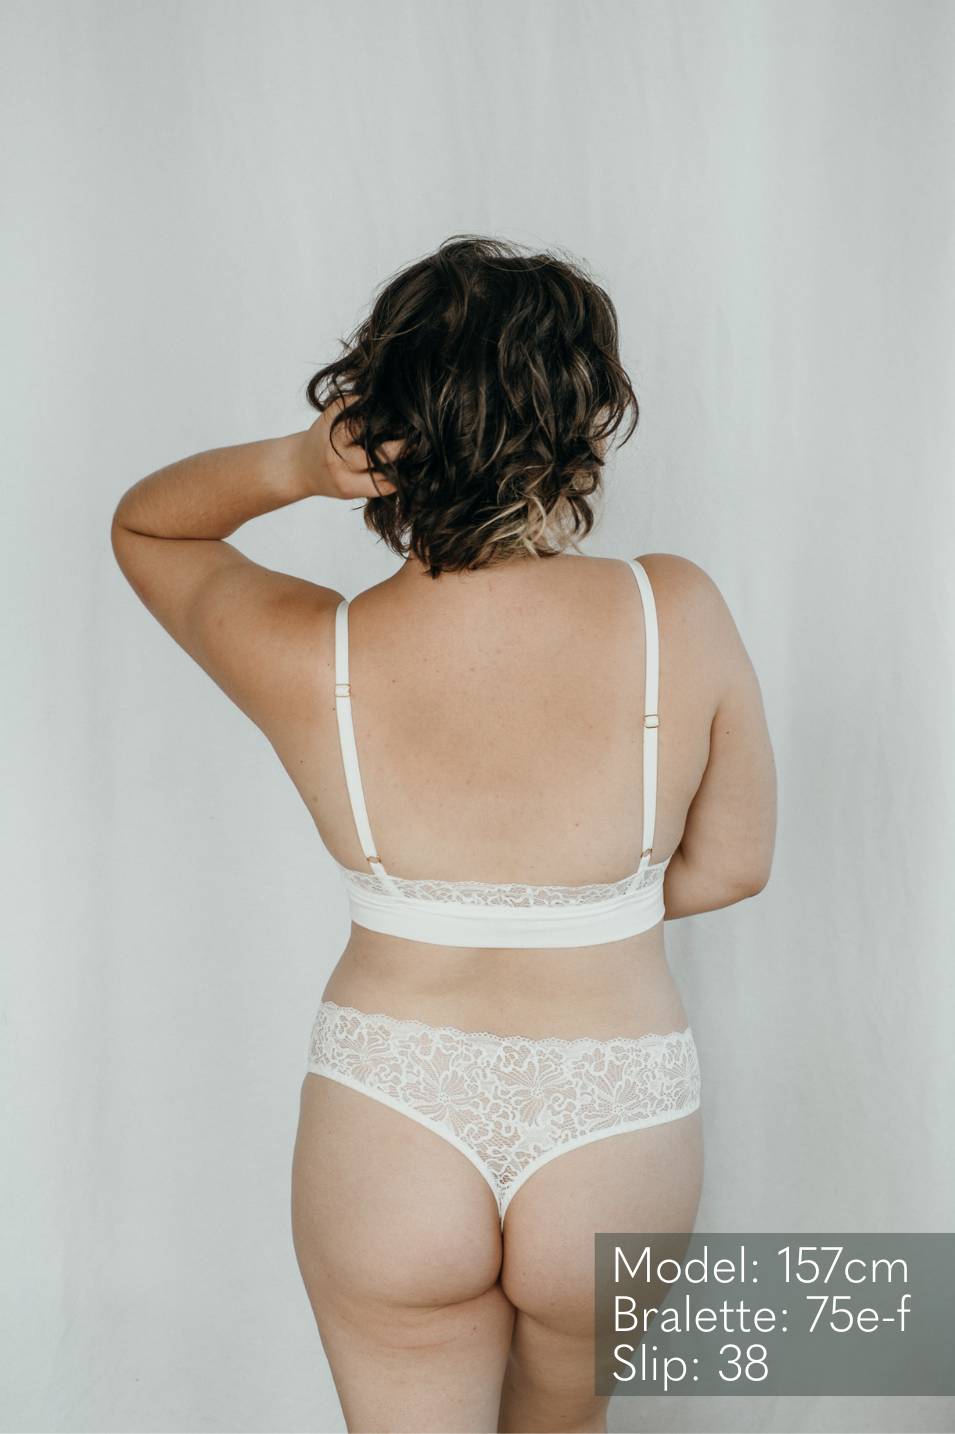 Fine String made of white lace worn by a woman with short hair.